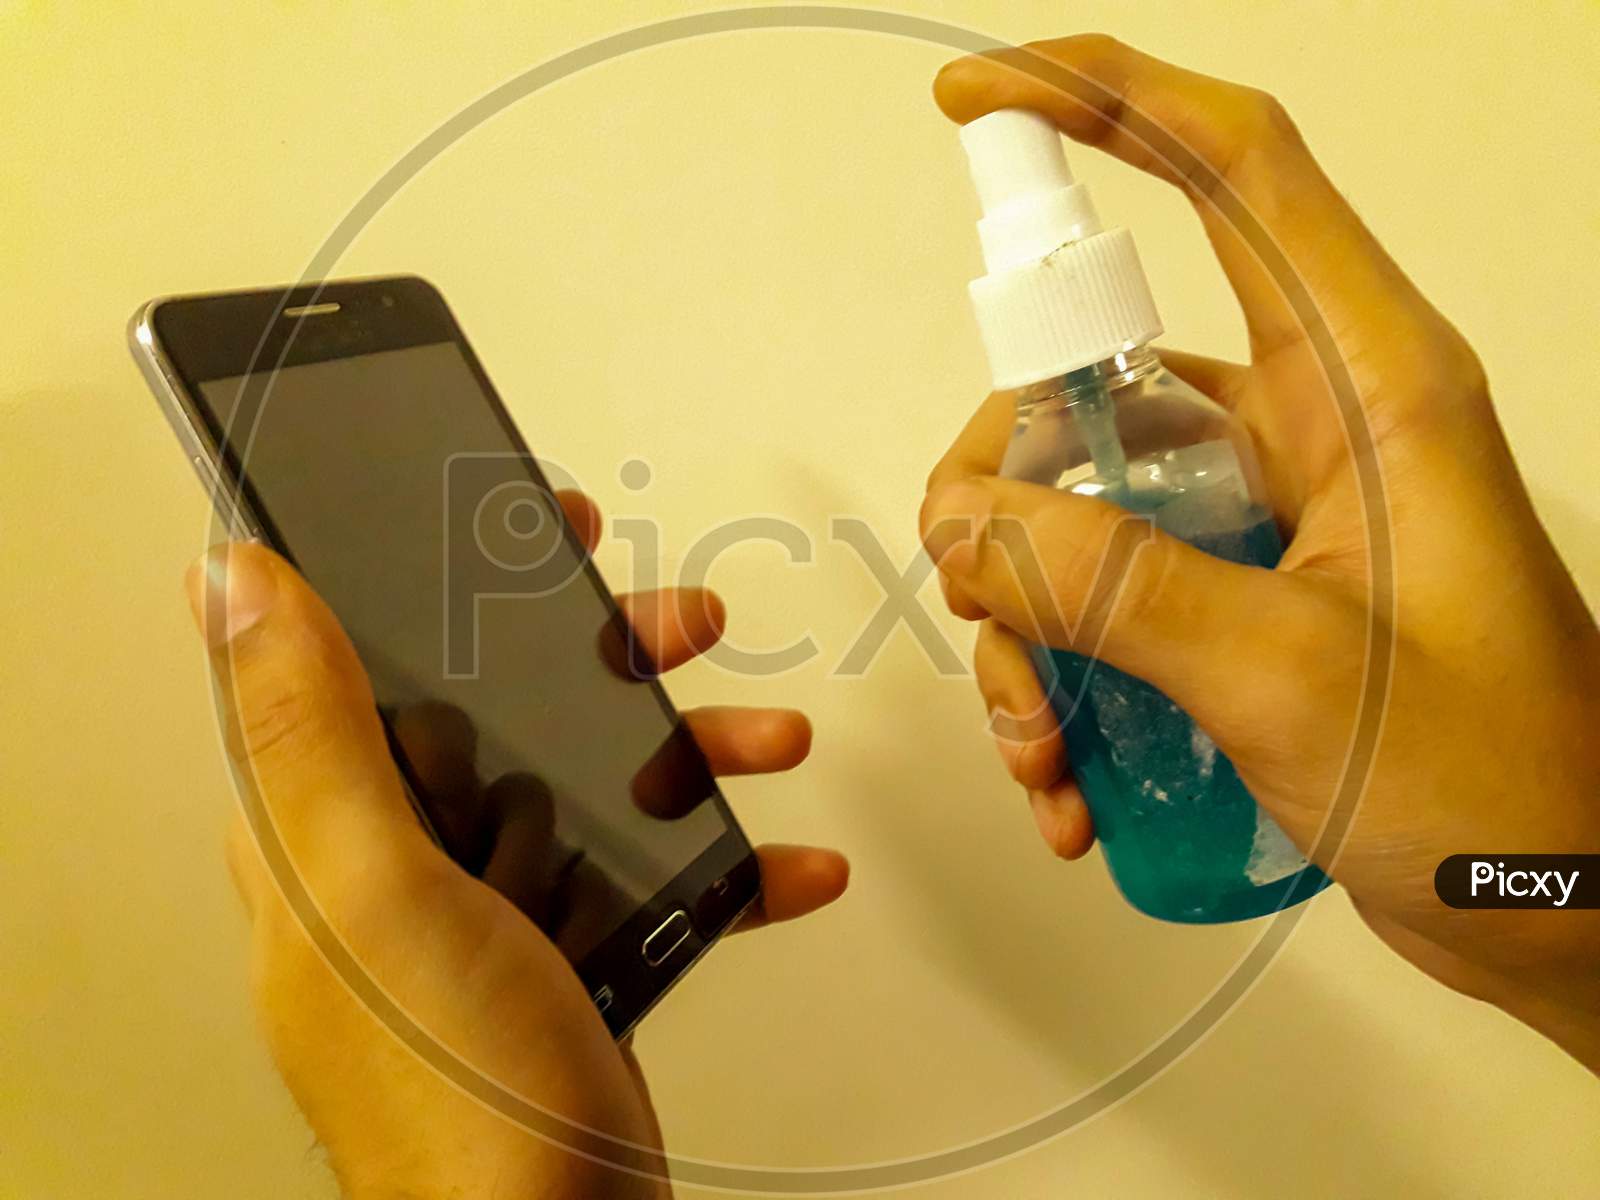 Disinfecting The mobile phone With Sanitizer to avoid the spread of COVID 19 or coronavirus With orange Background